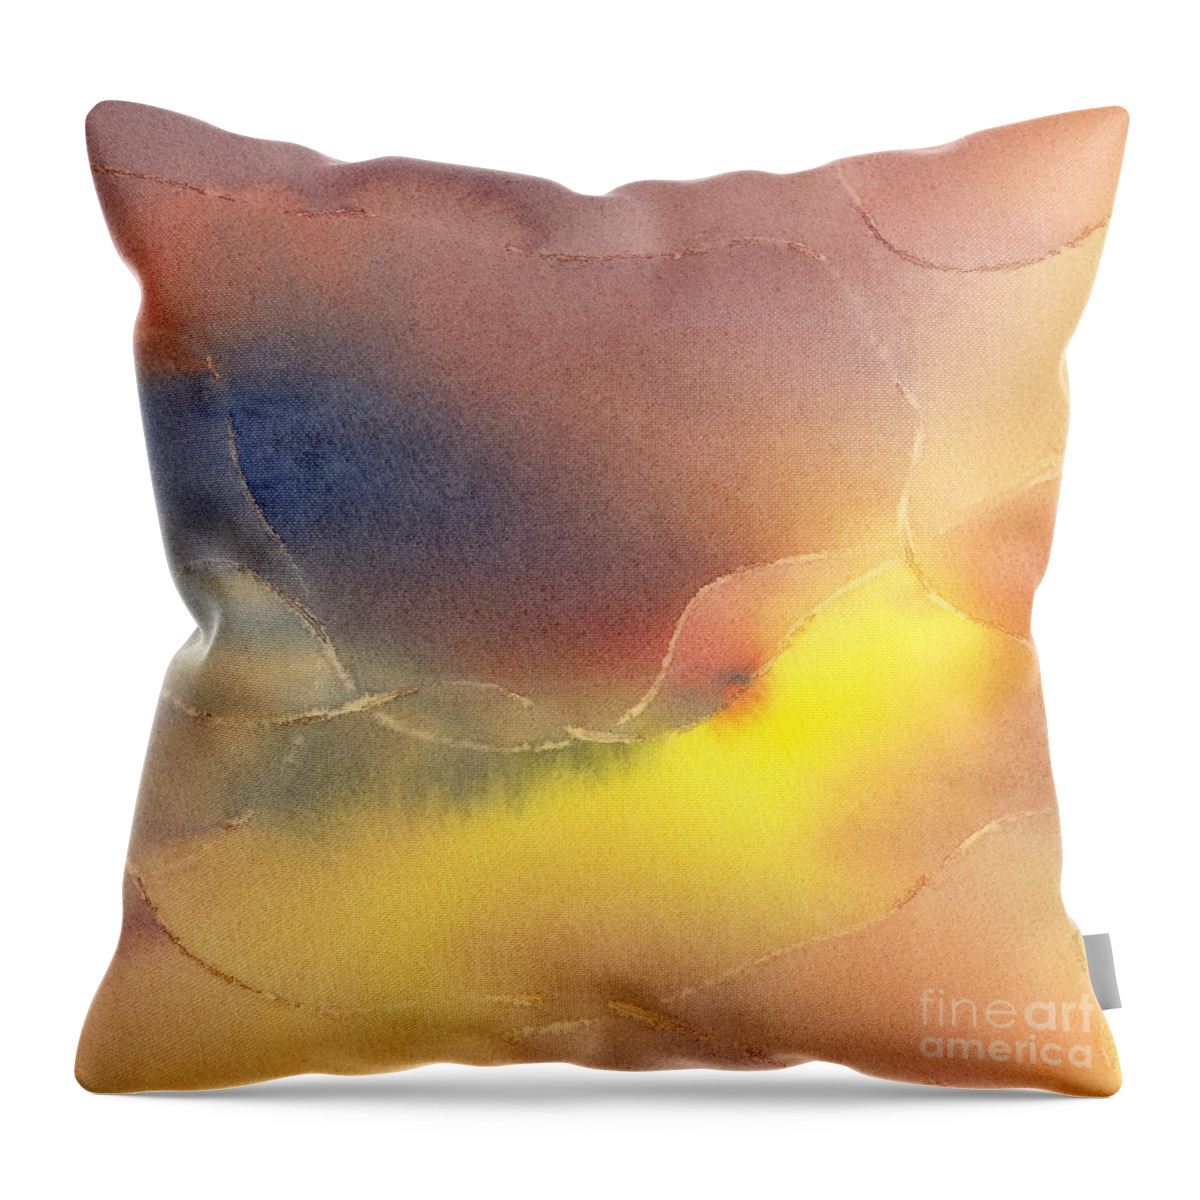 Abstract Throw Pillow featuring the painting Yellow Orange Blue Watercolor Square Design 1 by Sharon Freeman